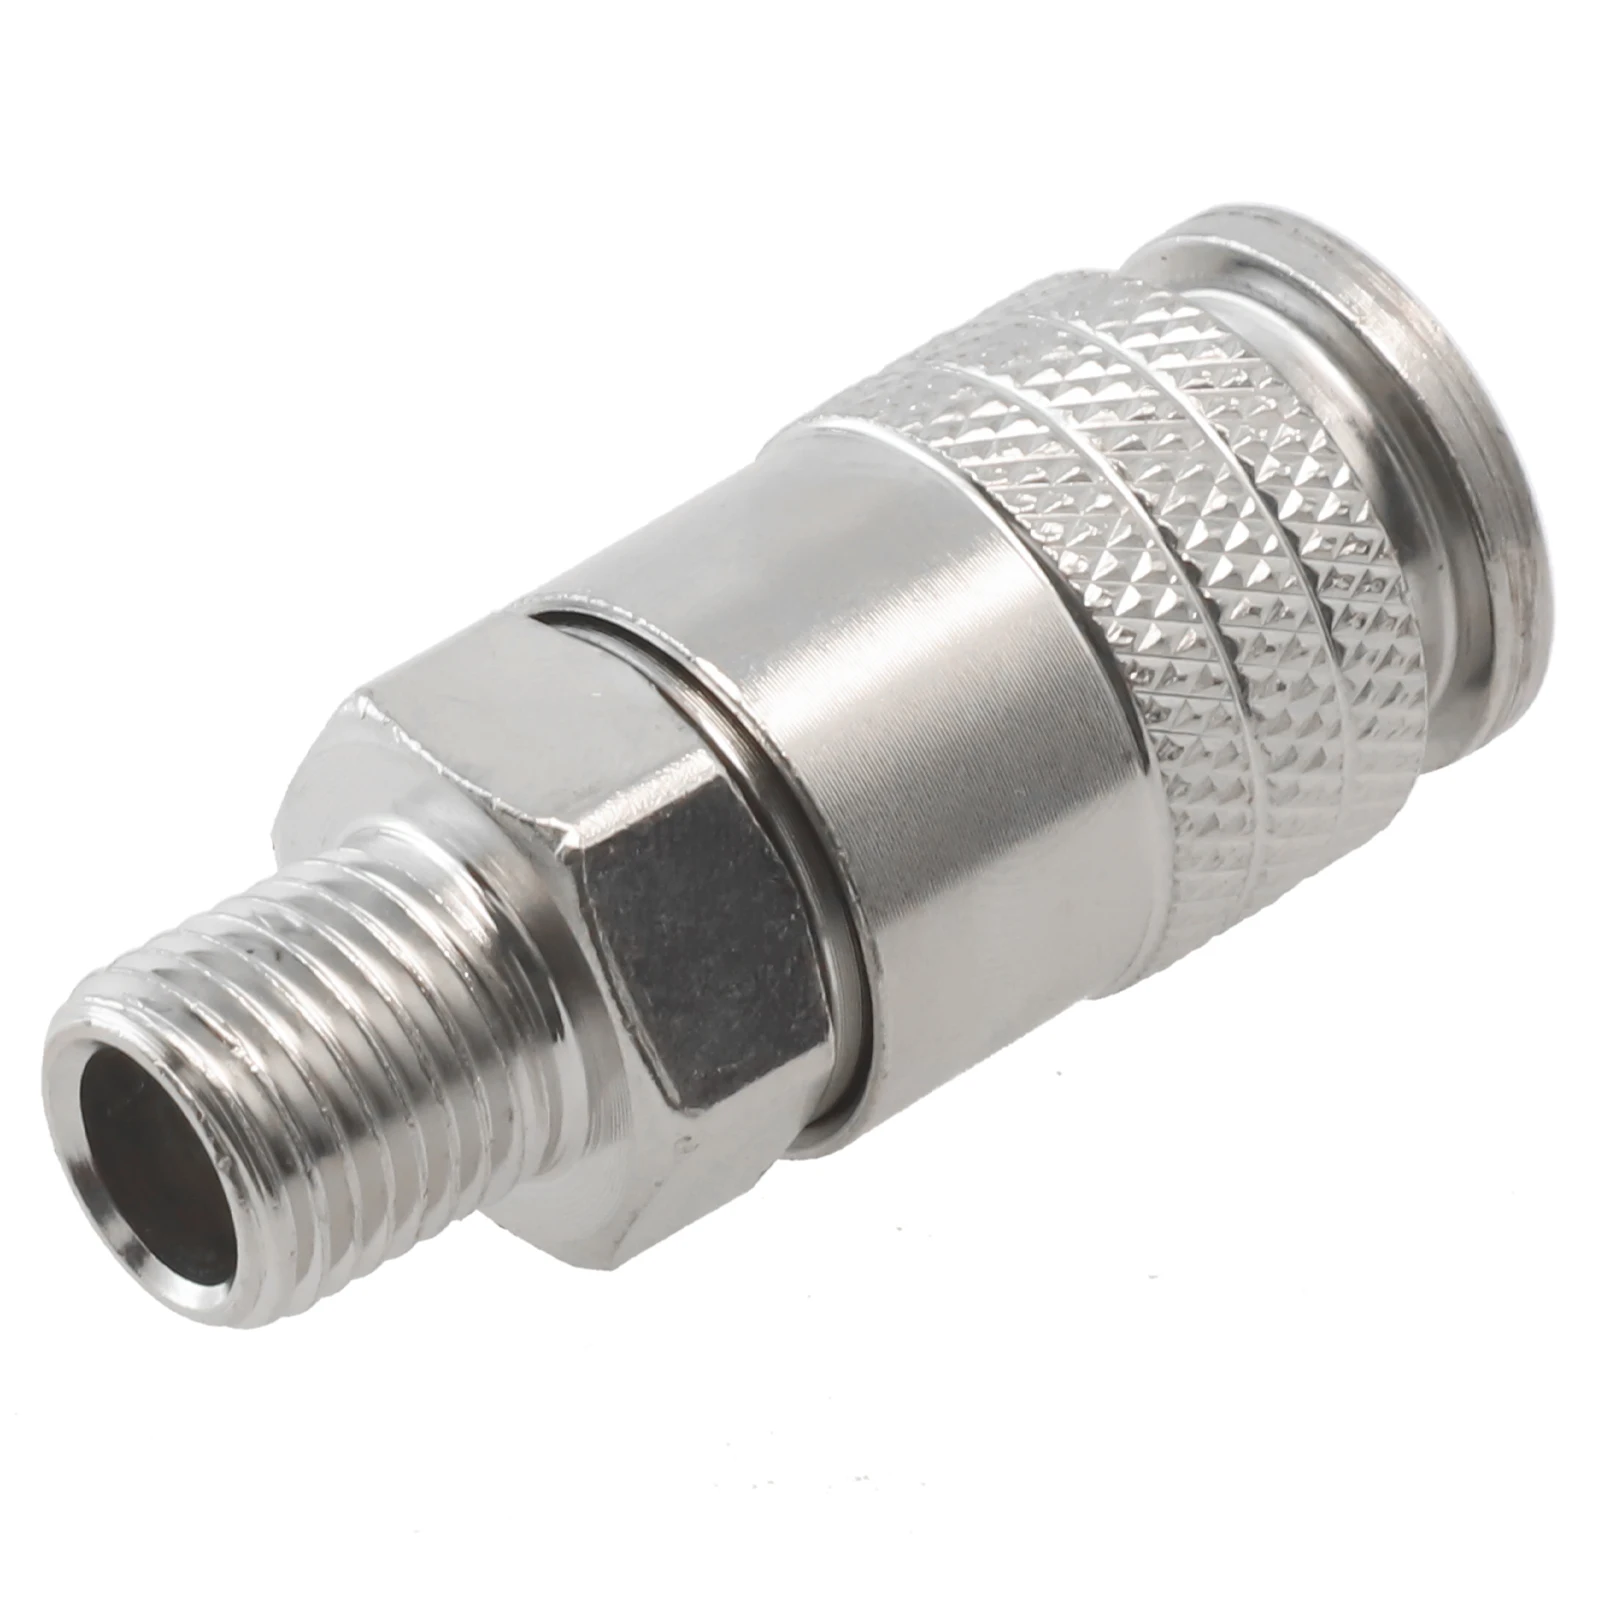 Pneumatic Fitting G1/4 Male Thread EU Standard Quick Connector For Air Compressor 53mm Length Air Compressor Tool Parts air compressor connector pneumatic accessories 1 4 quick connector air gas distributor for pump tool coupler multi shunt